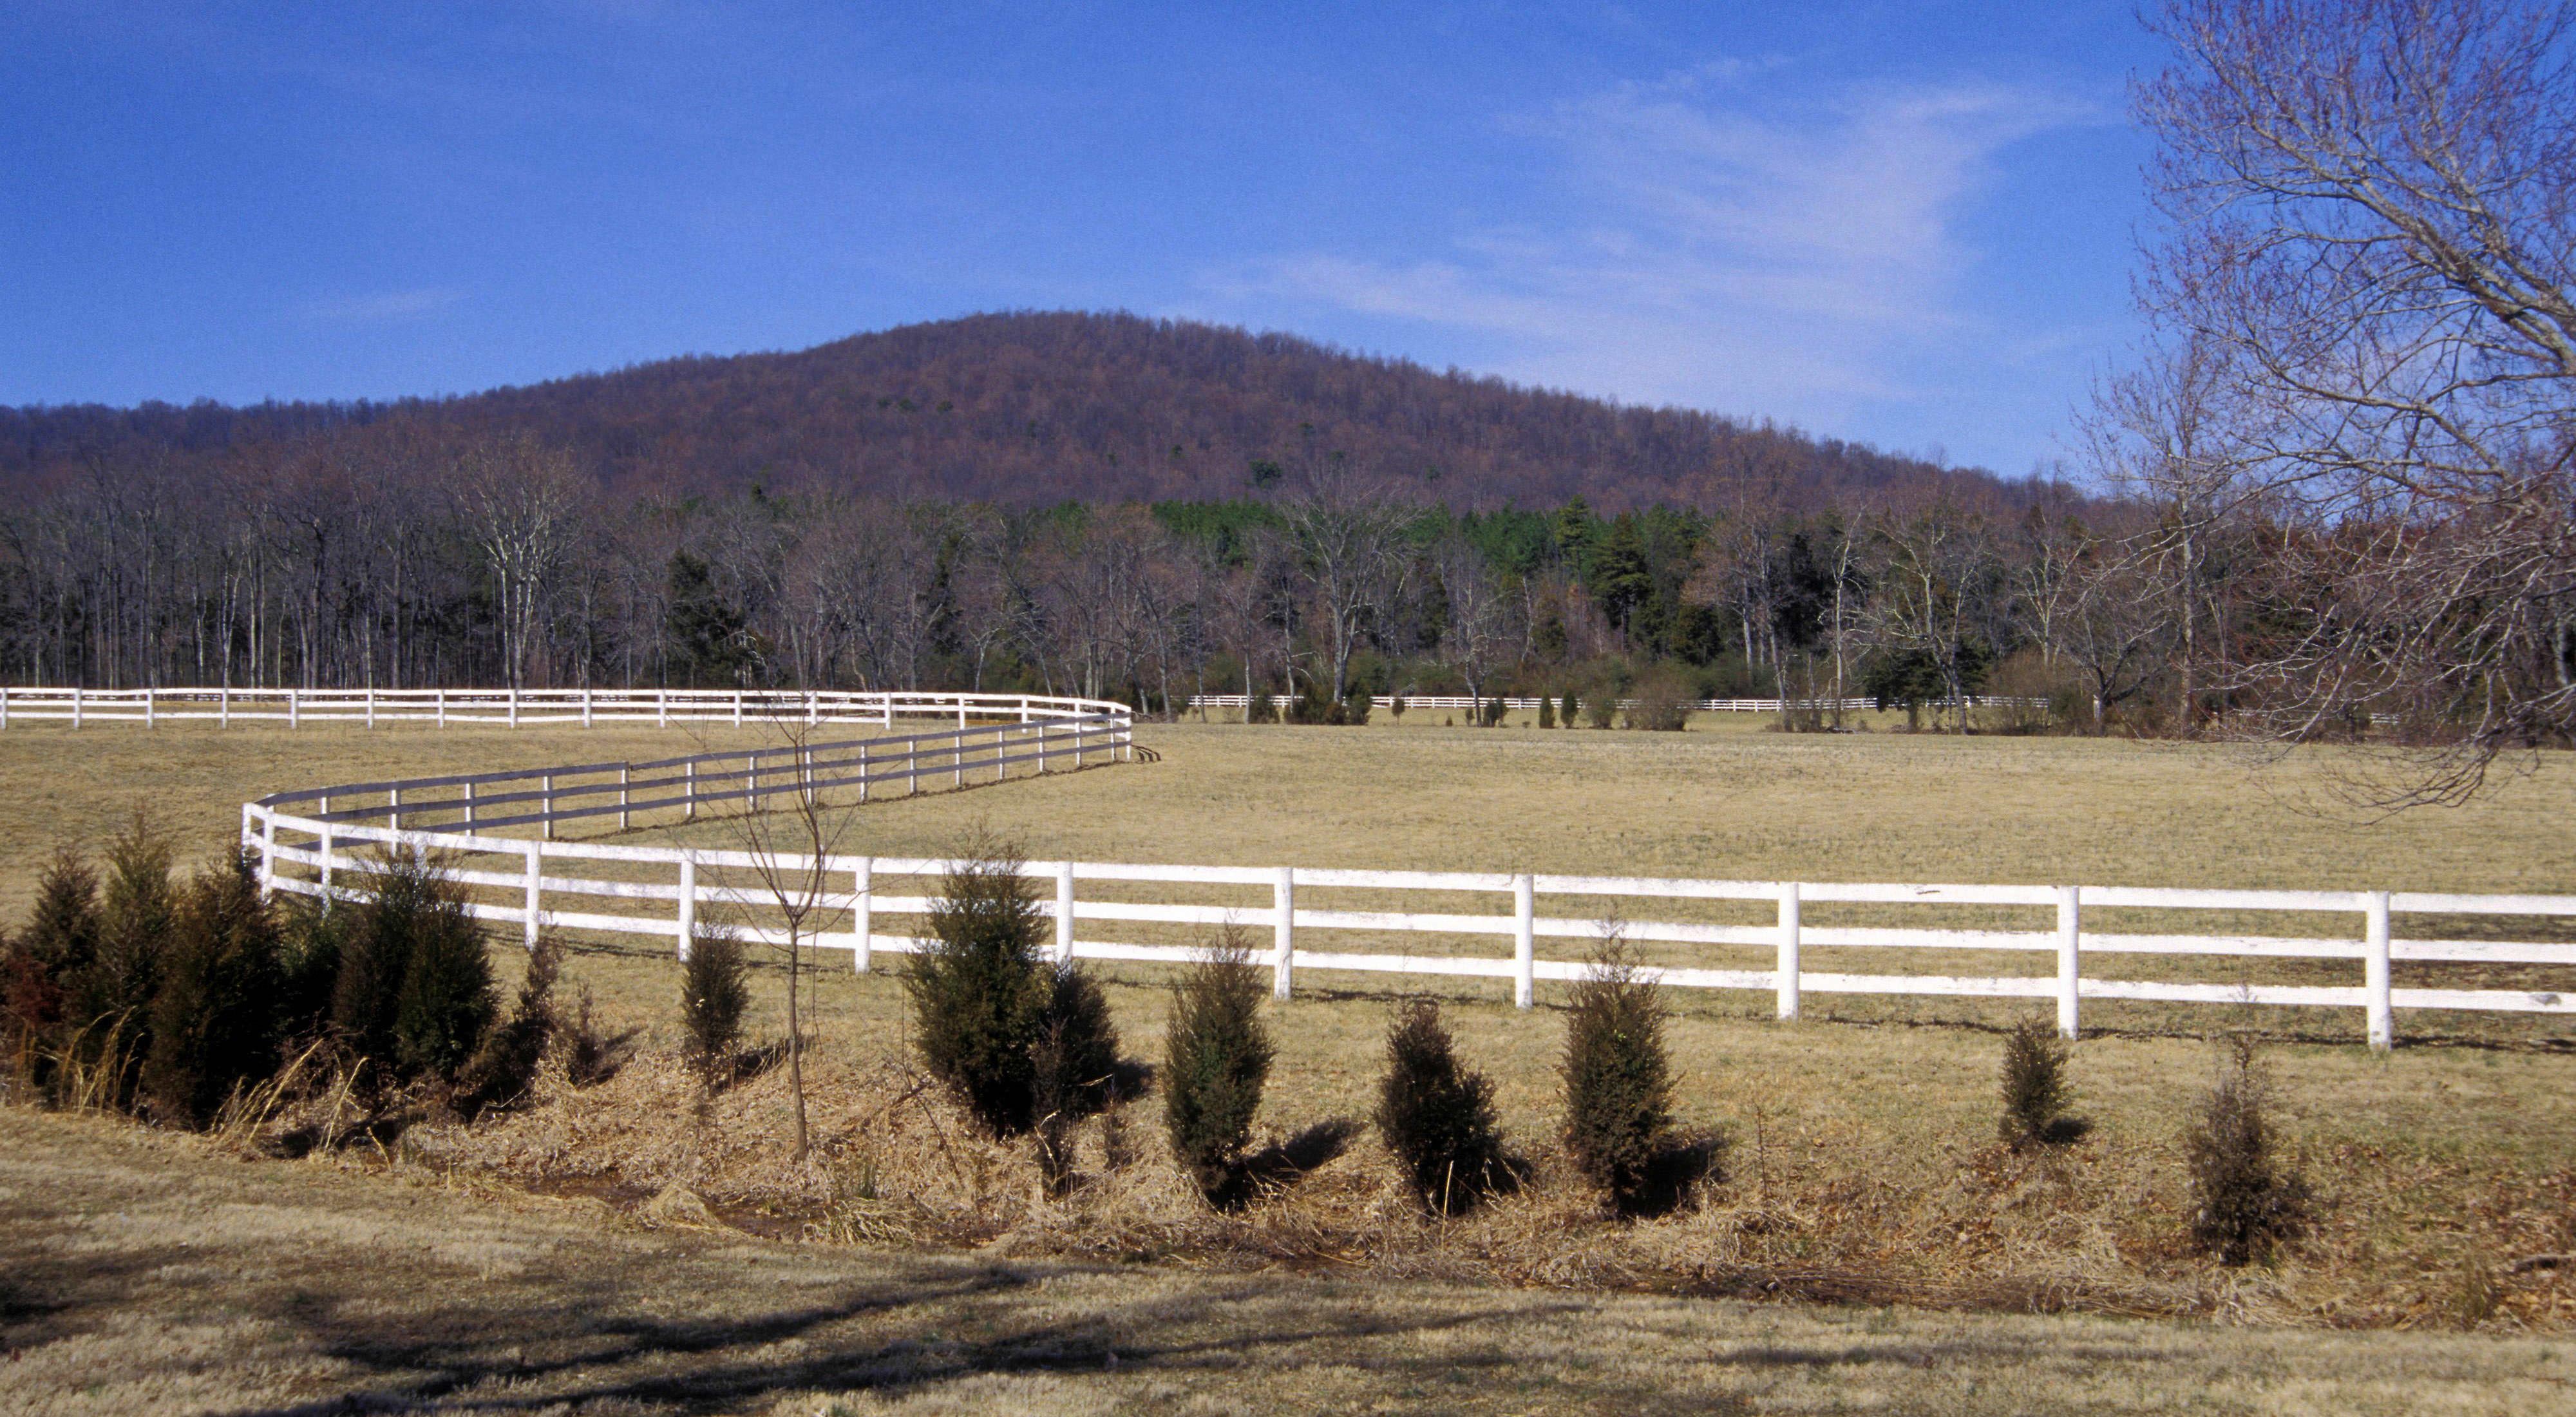 A white fence curves in an ess through a pasture. A tall mountain rises in the background.